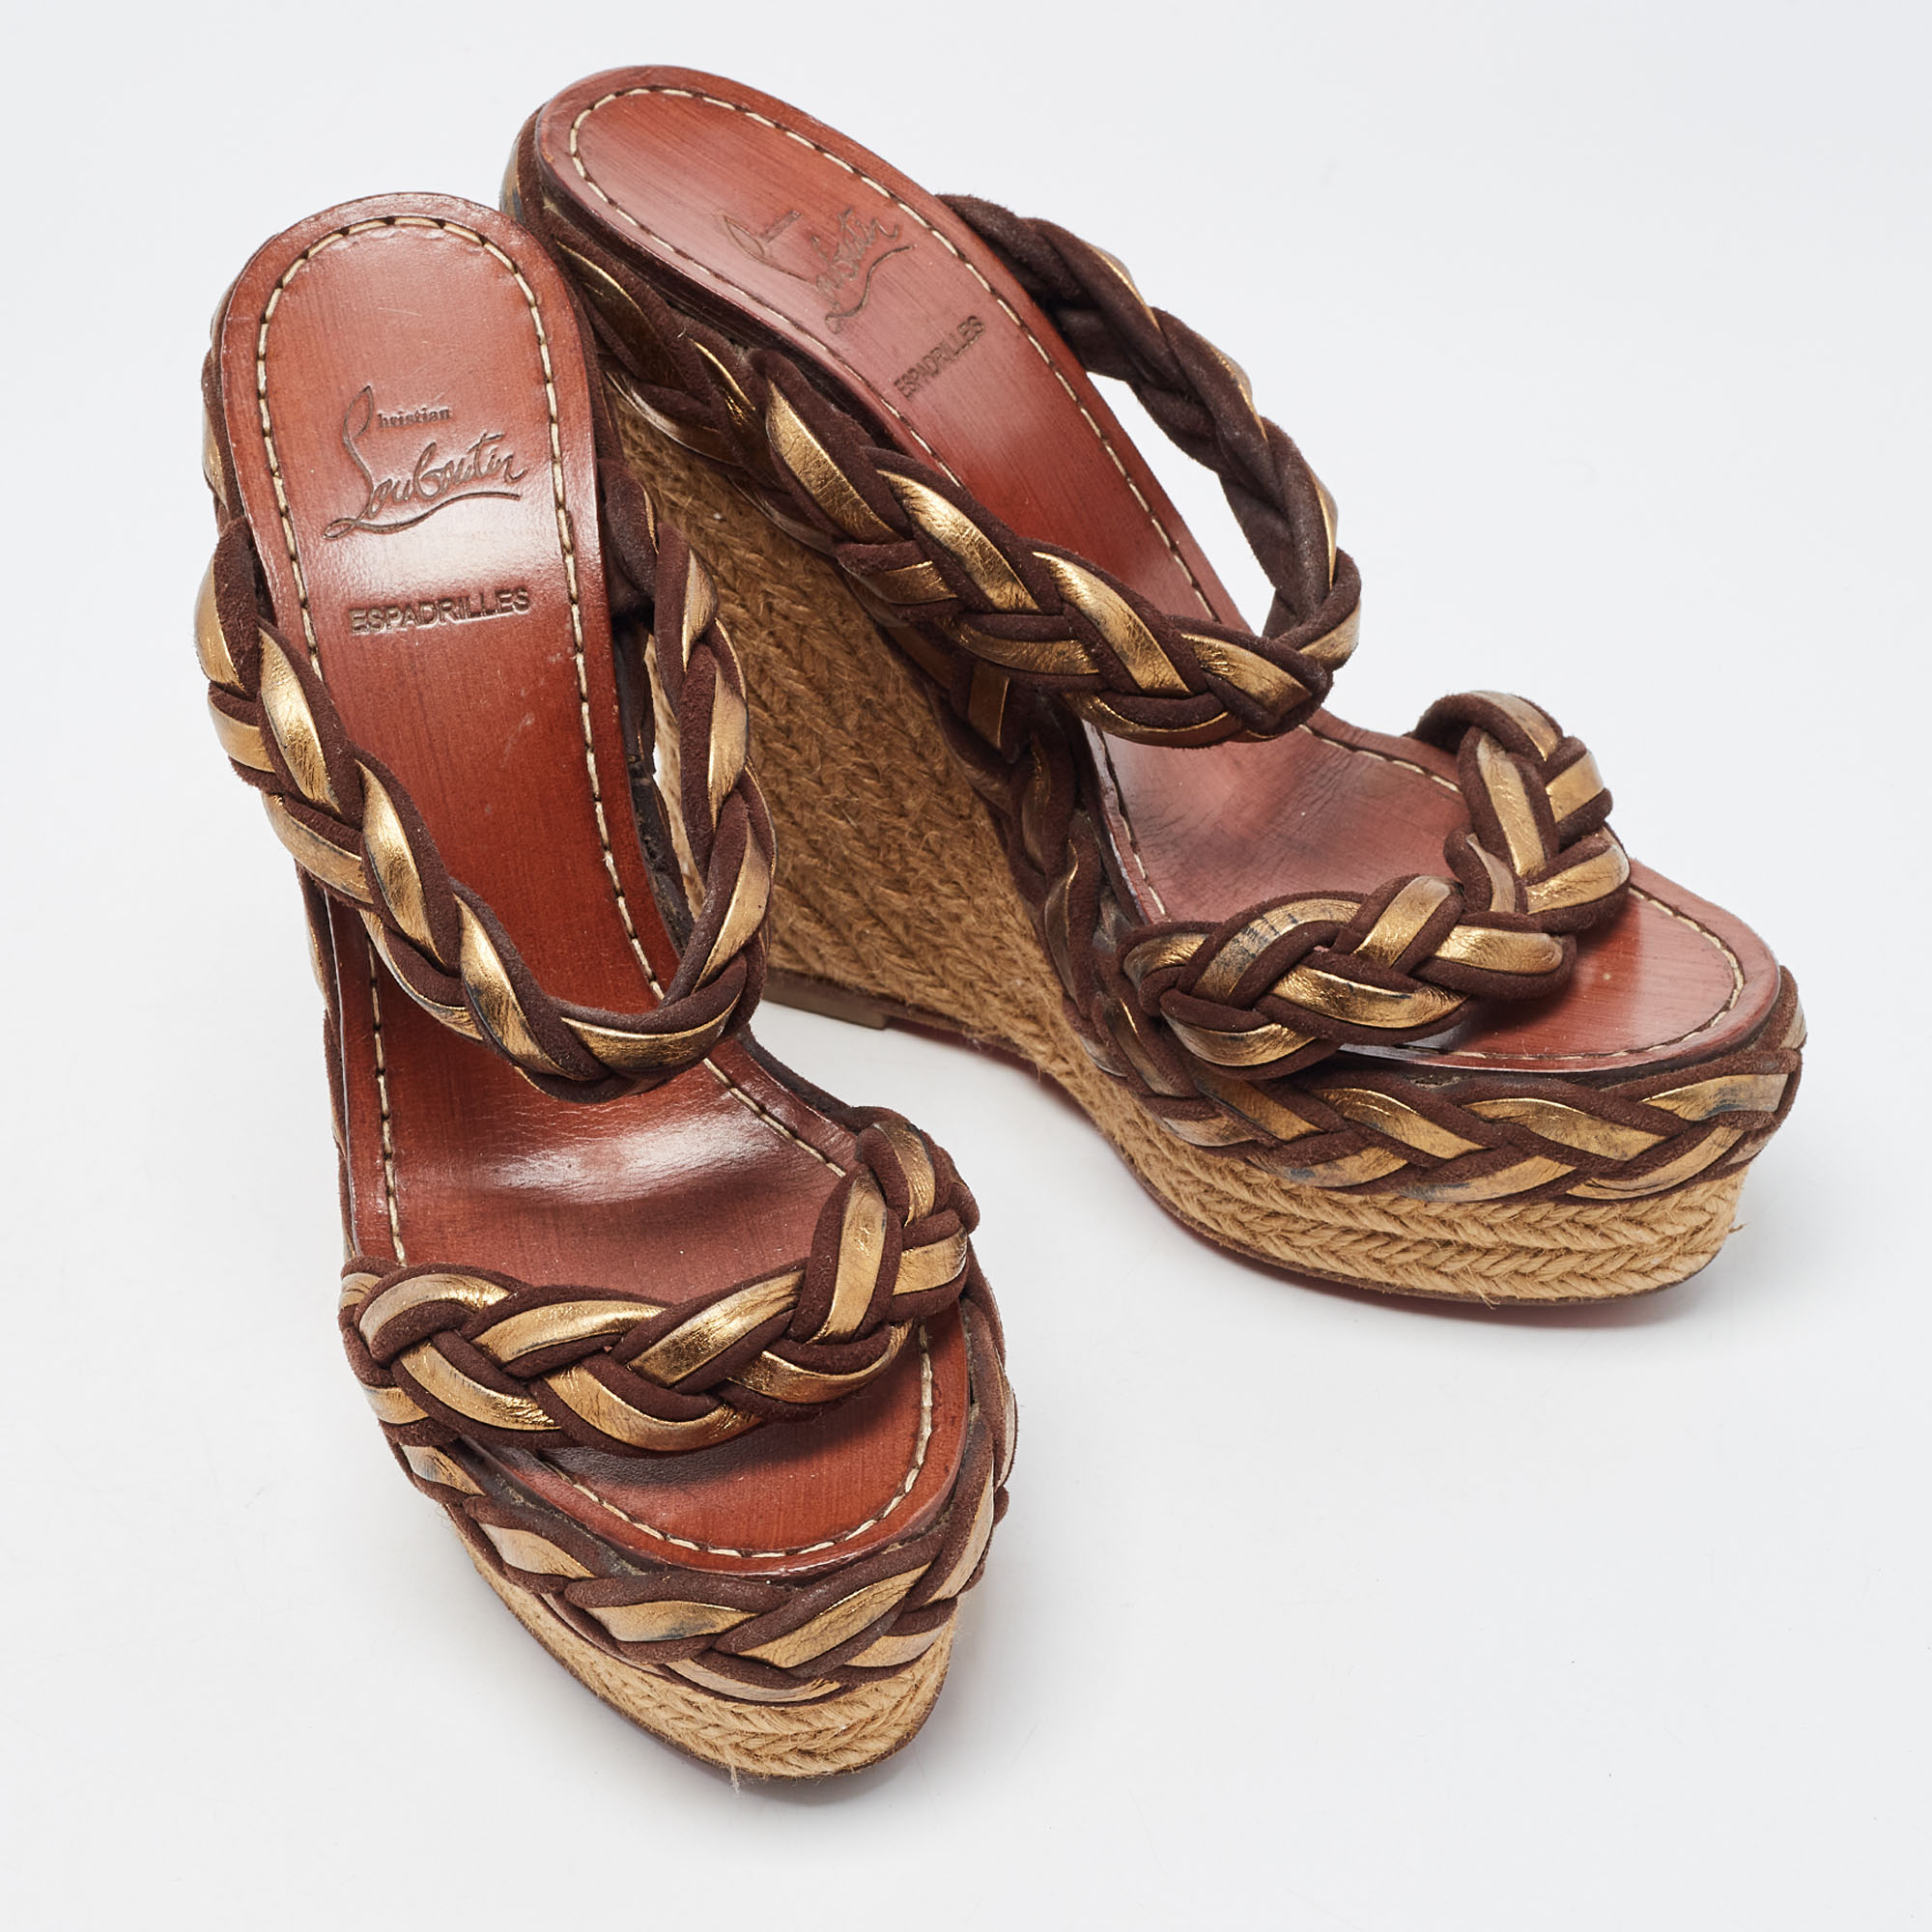 Christian Louboutin Brown/Gold Braided Leather And Suede Espadrille Wedge Sandals Size 35